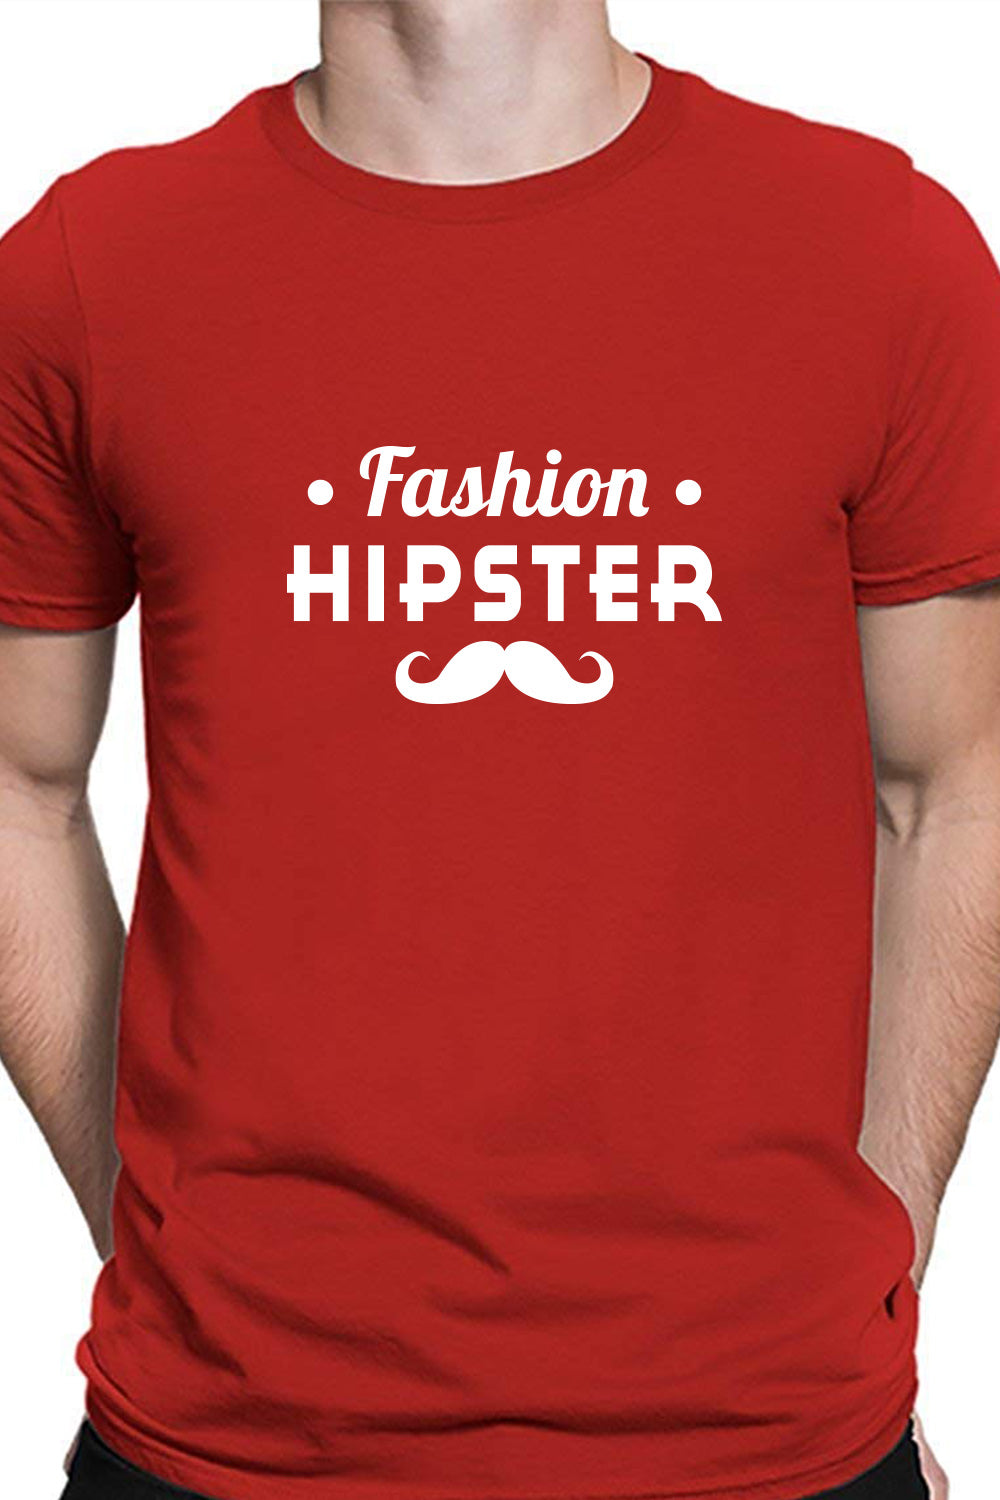 Fashion Hipster - Cool Casual Red Printed T-Shirt